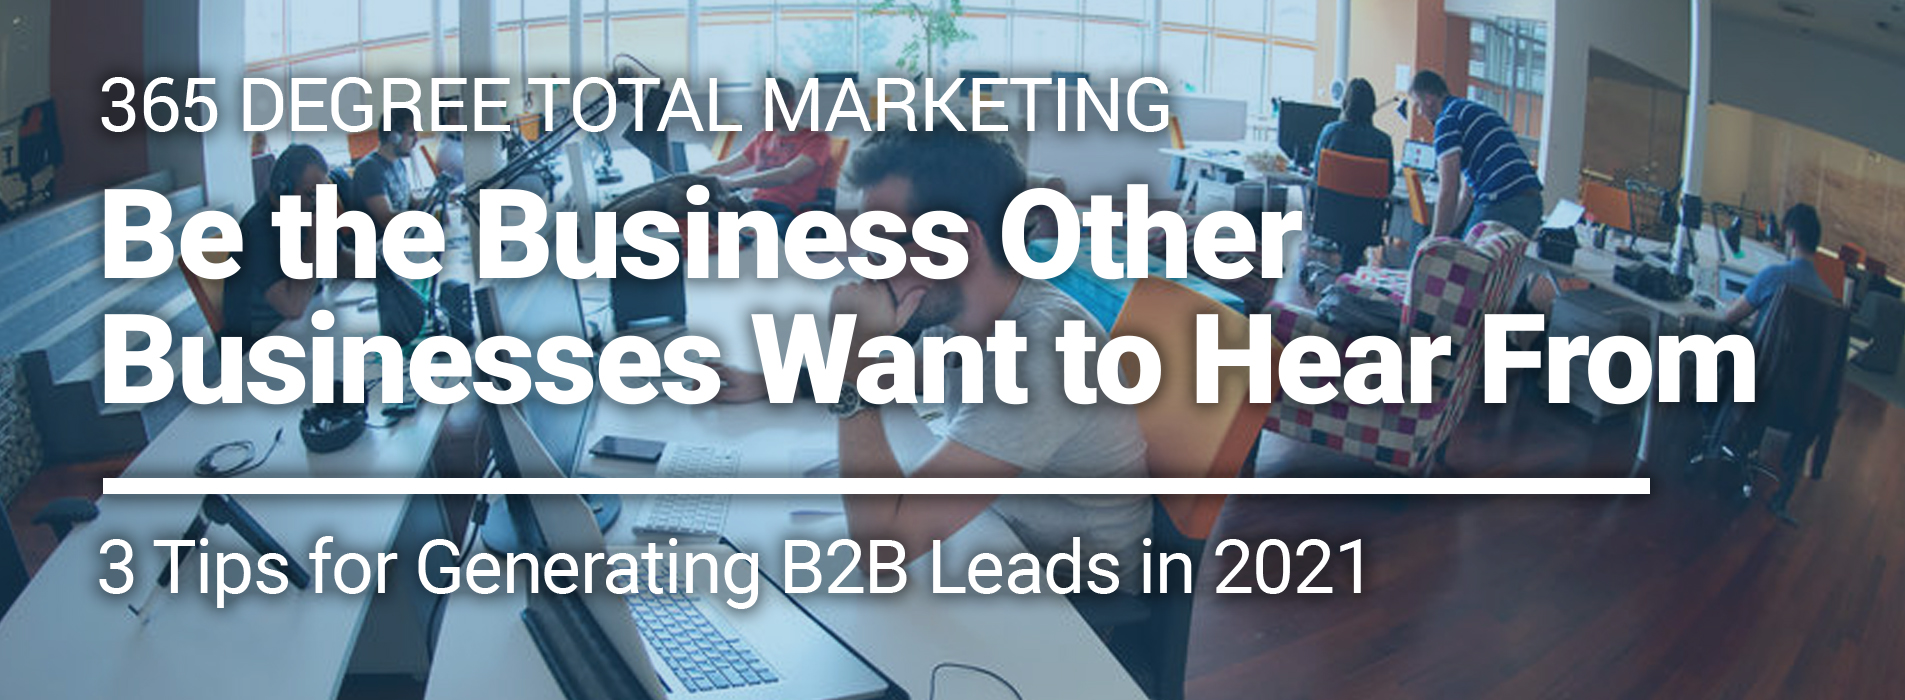 Tips for Generating B2B Leads